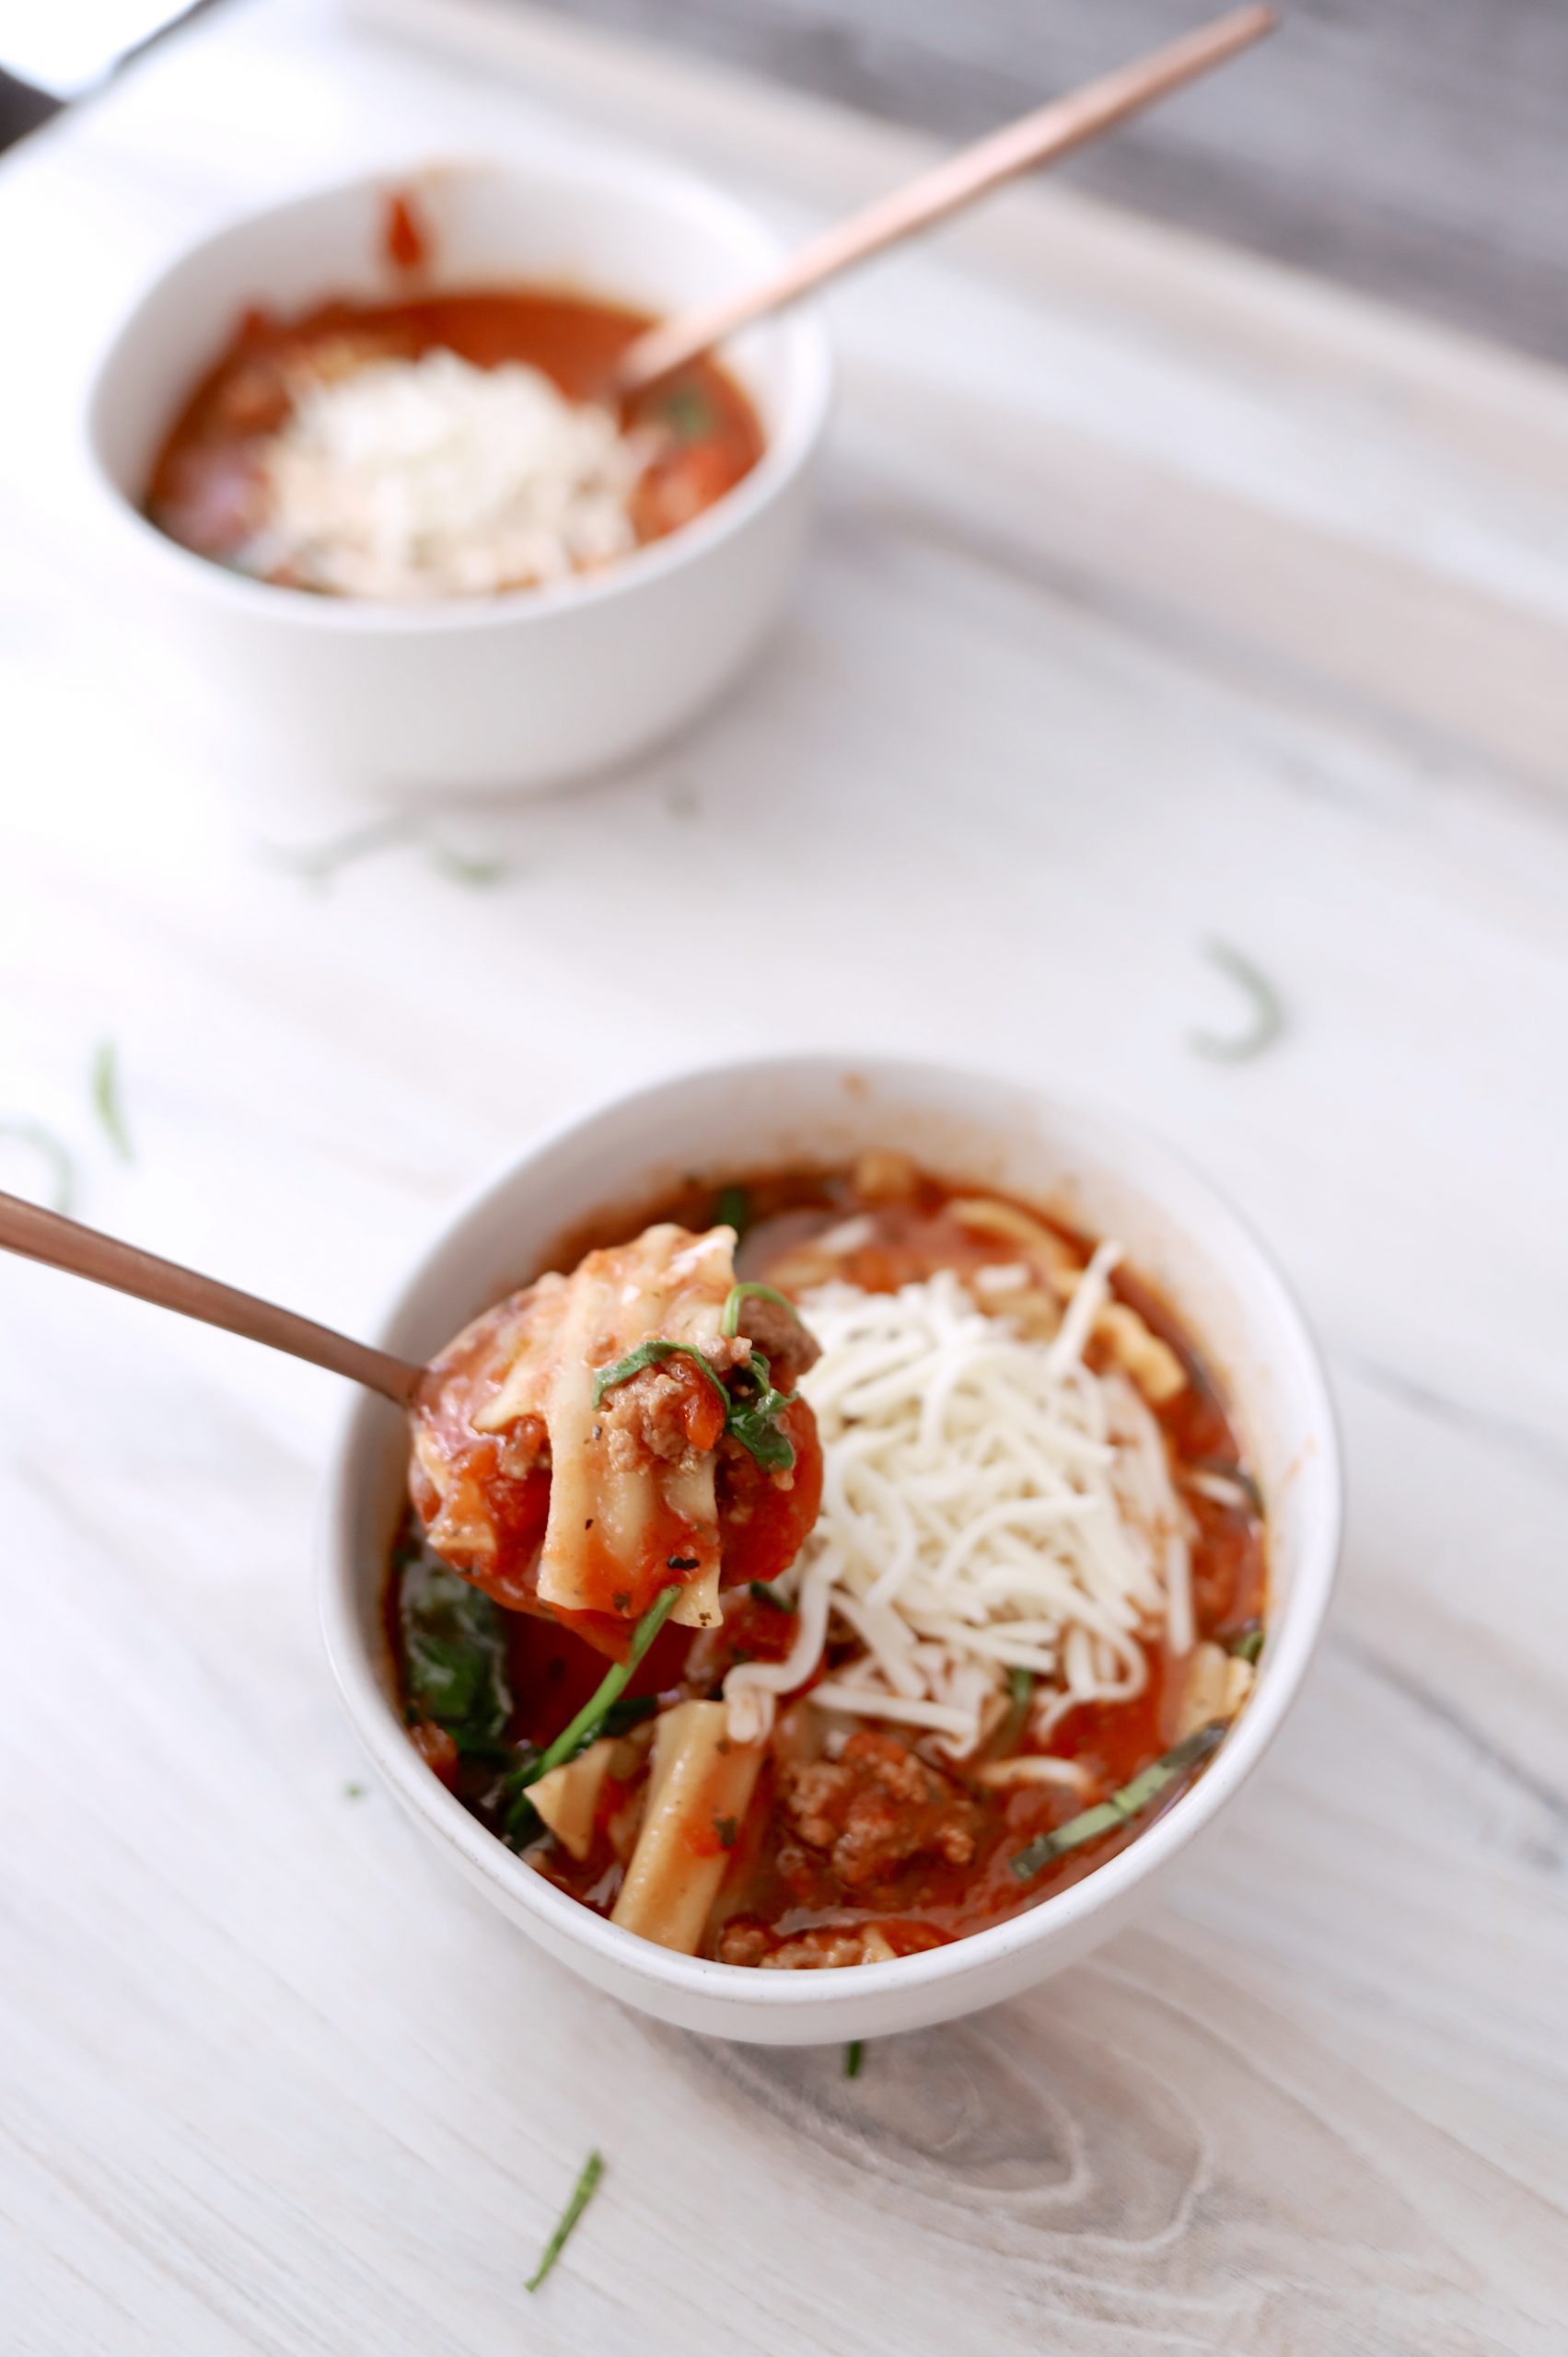 You have to try this Easy and Delicious Slow Cooker Lasagna Soup! A lasagna soup recipe that tastes just like lasagna but is easier to make and you can do it one pot or in a slow cooker. This is one of my favorite dinner recipes and I like it BETTER than traditional lasagna! #eatingonadime #crockpotrecipes #souprecipes #slowcookerrecipes